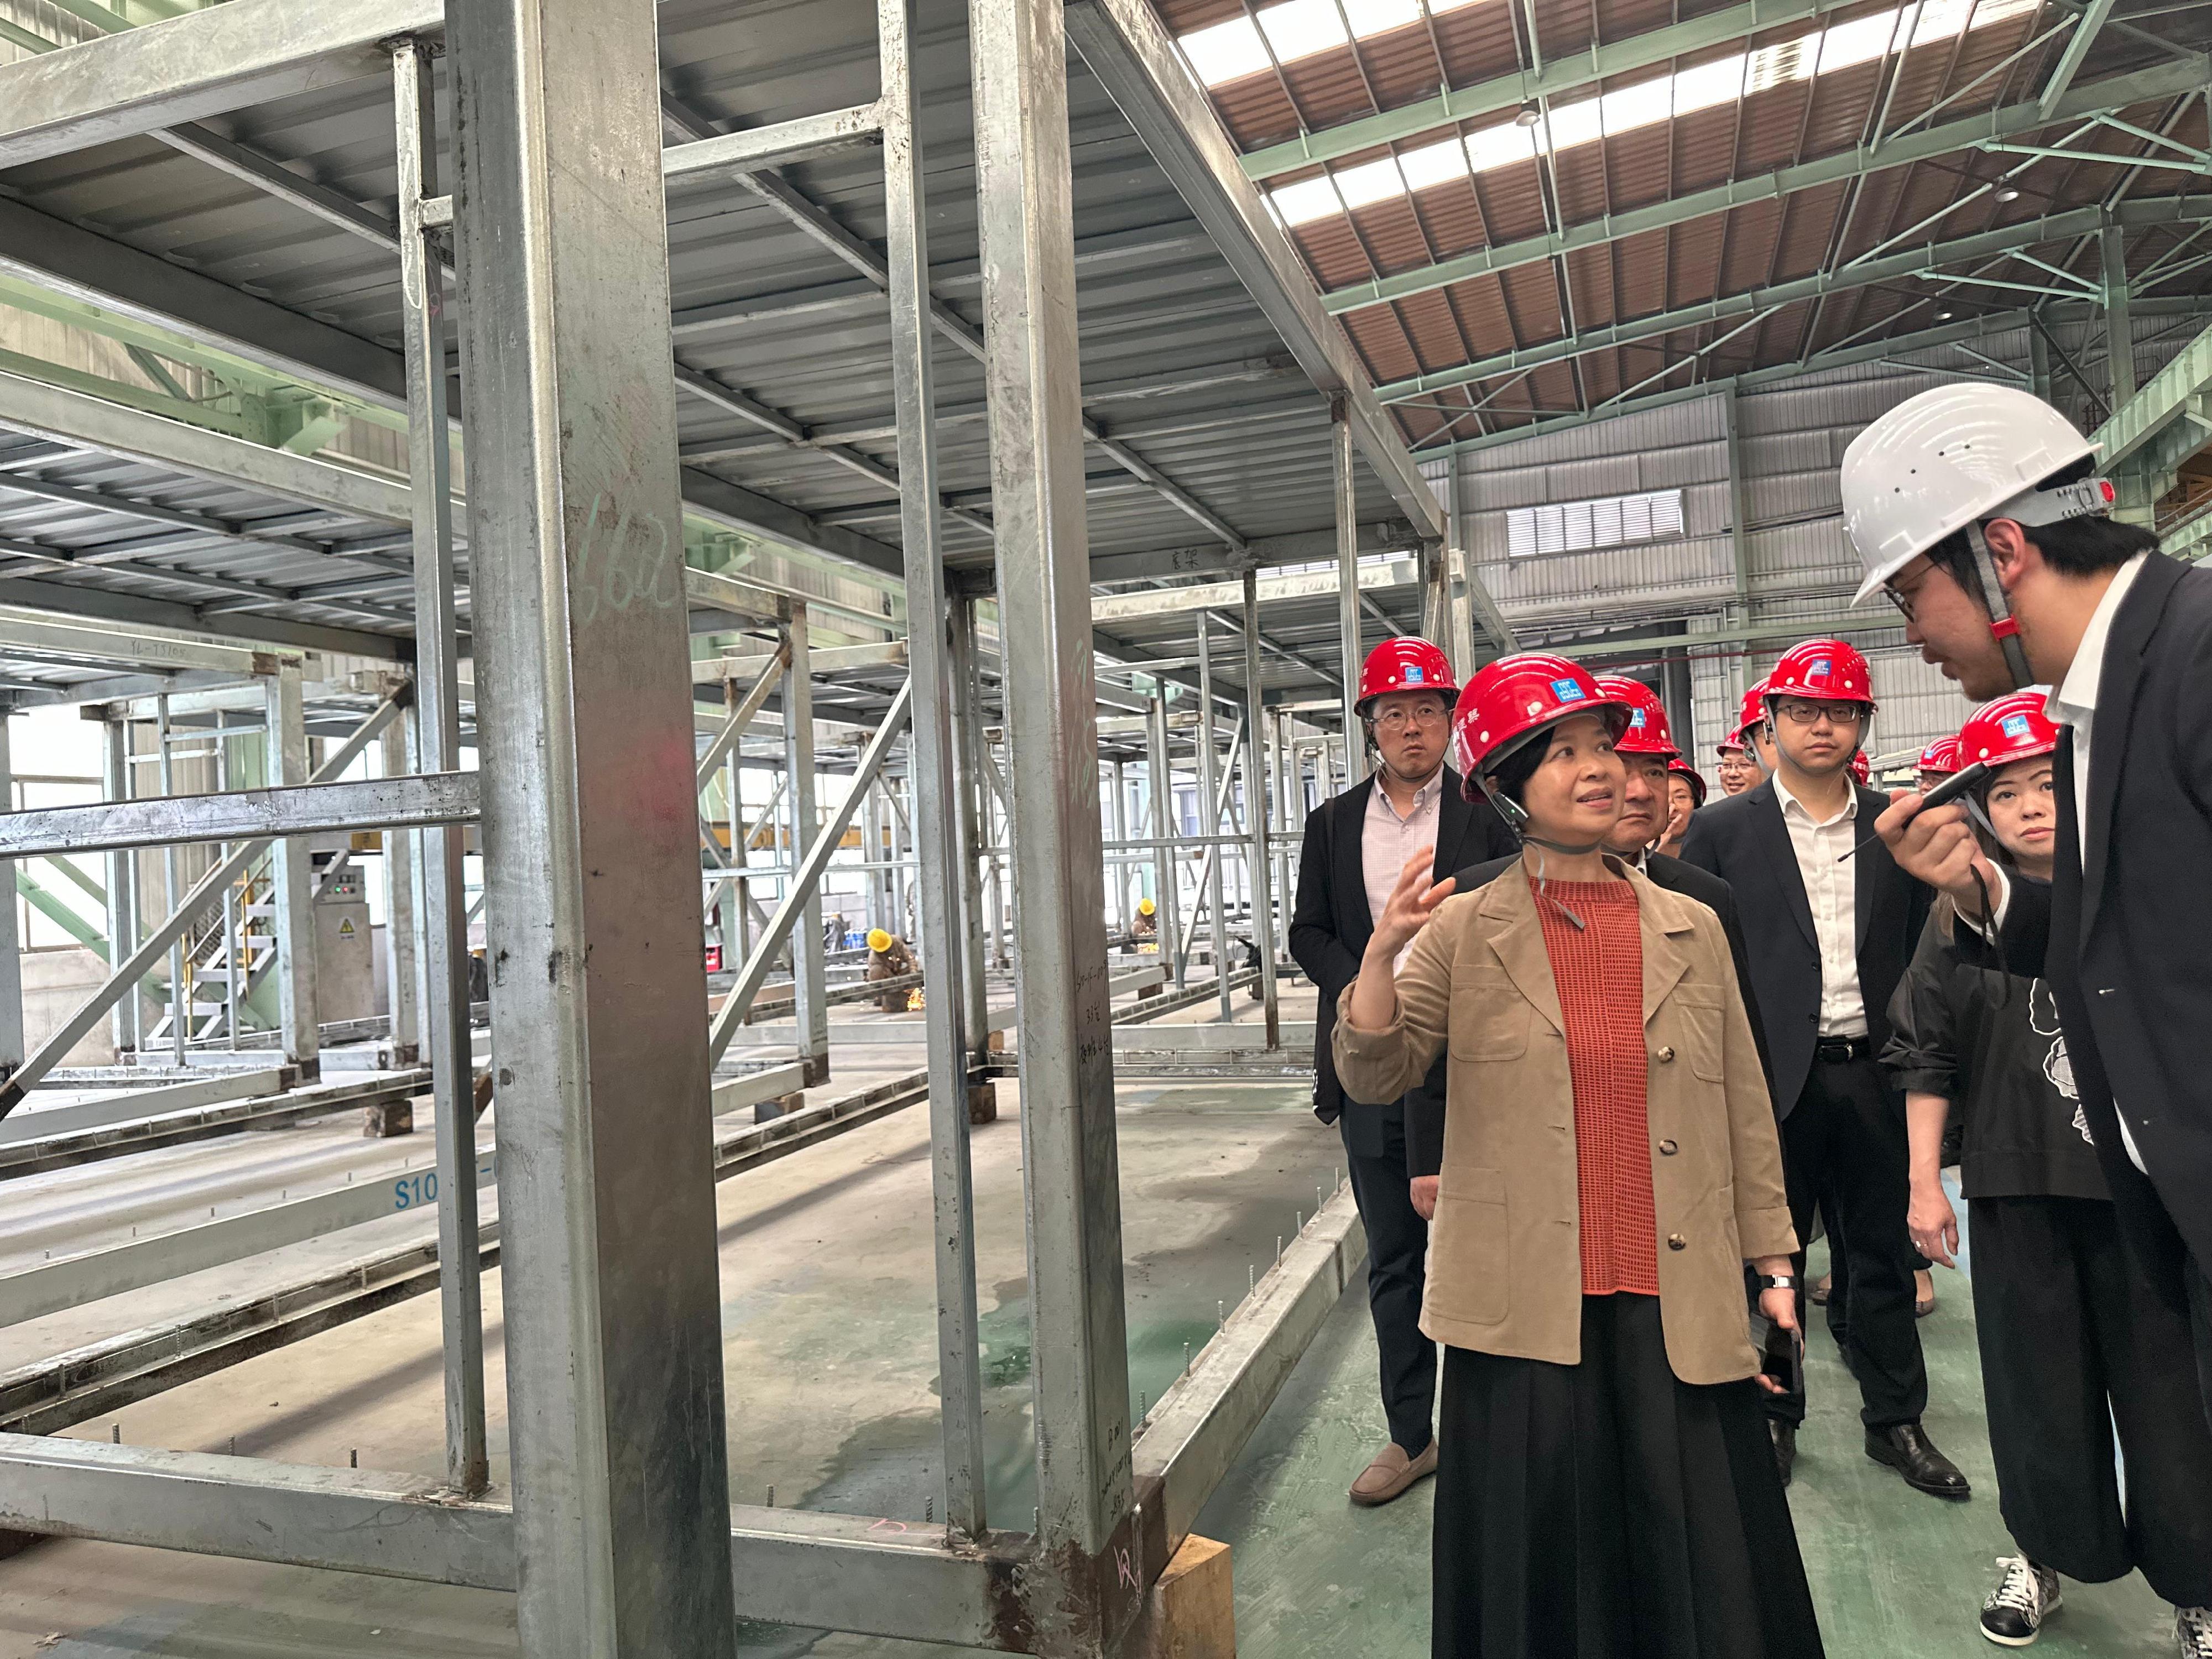 The Secretary for Housing, Ms Winnie Ho, and a delegation of representatives from the Housing Bureau and the Architectural Services Department visited Huizhou today (March 25) to inspect the production progress of Modular Integrated Construction (MiC) modules of Light Public Housing (LPH). Photo shows Ms Ho (front row, left) visiting CSCEC Science and Industry Greentech Corporation Limited to inspect the factory manufacturing LPH MiC modules.